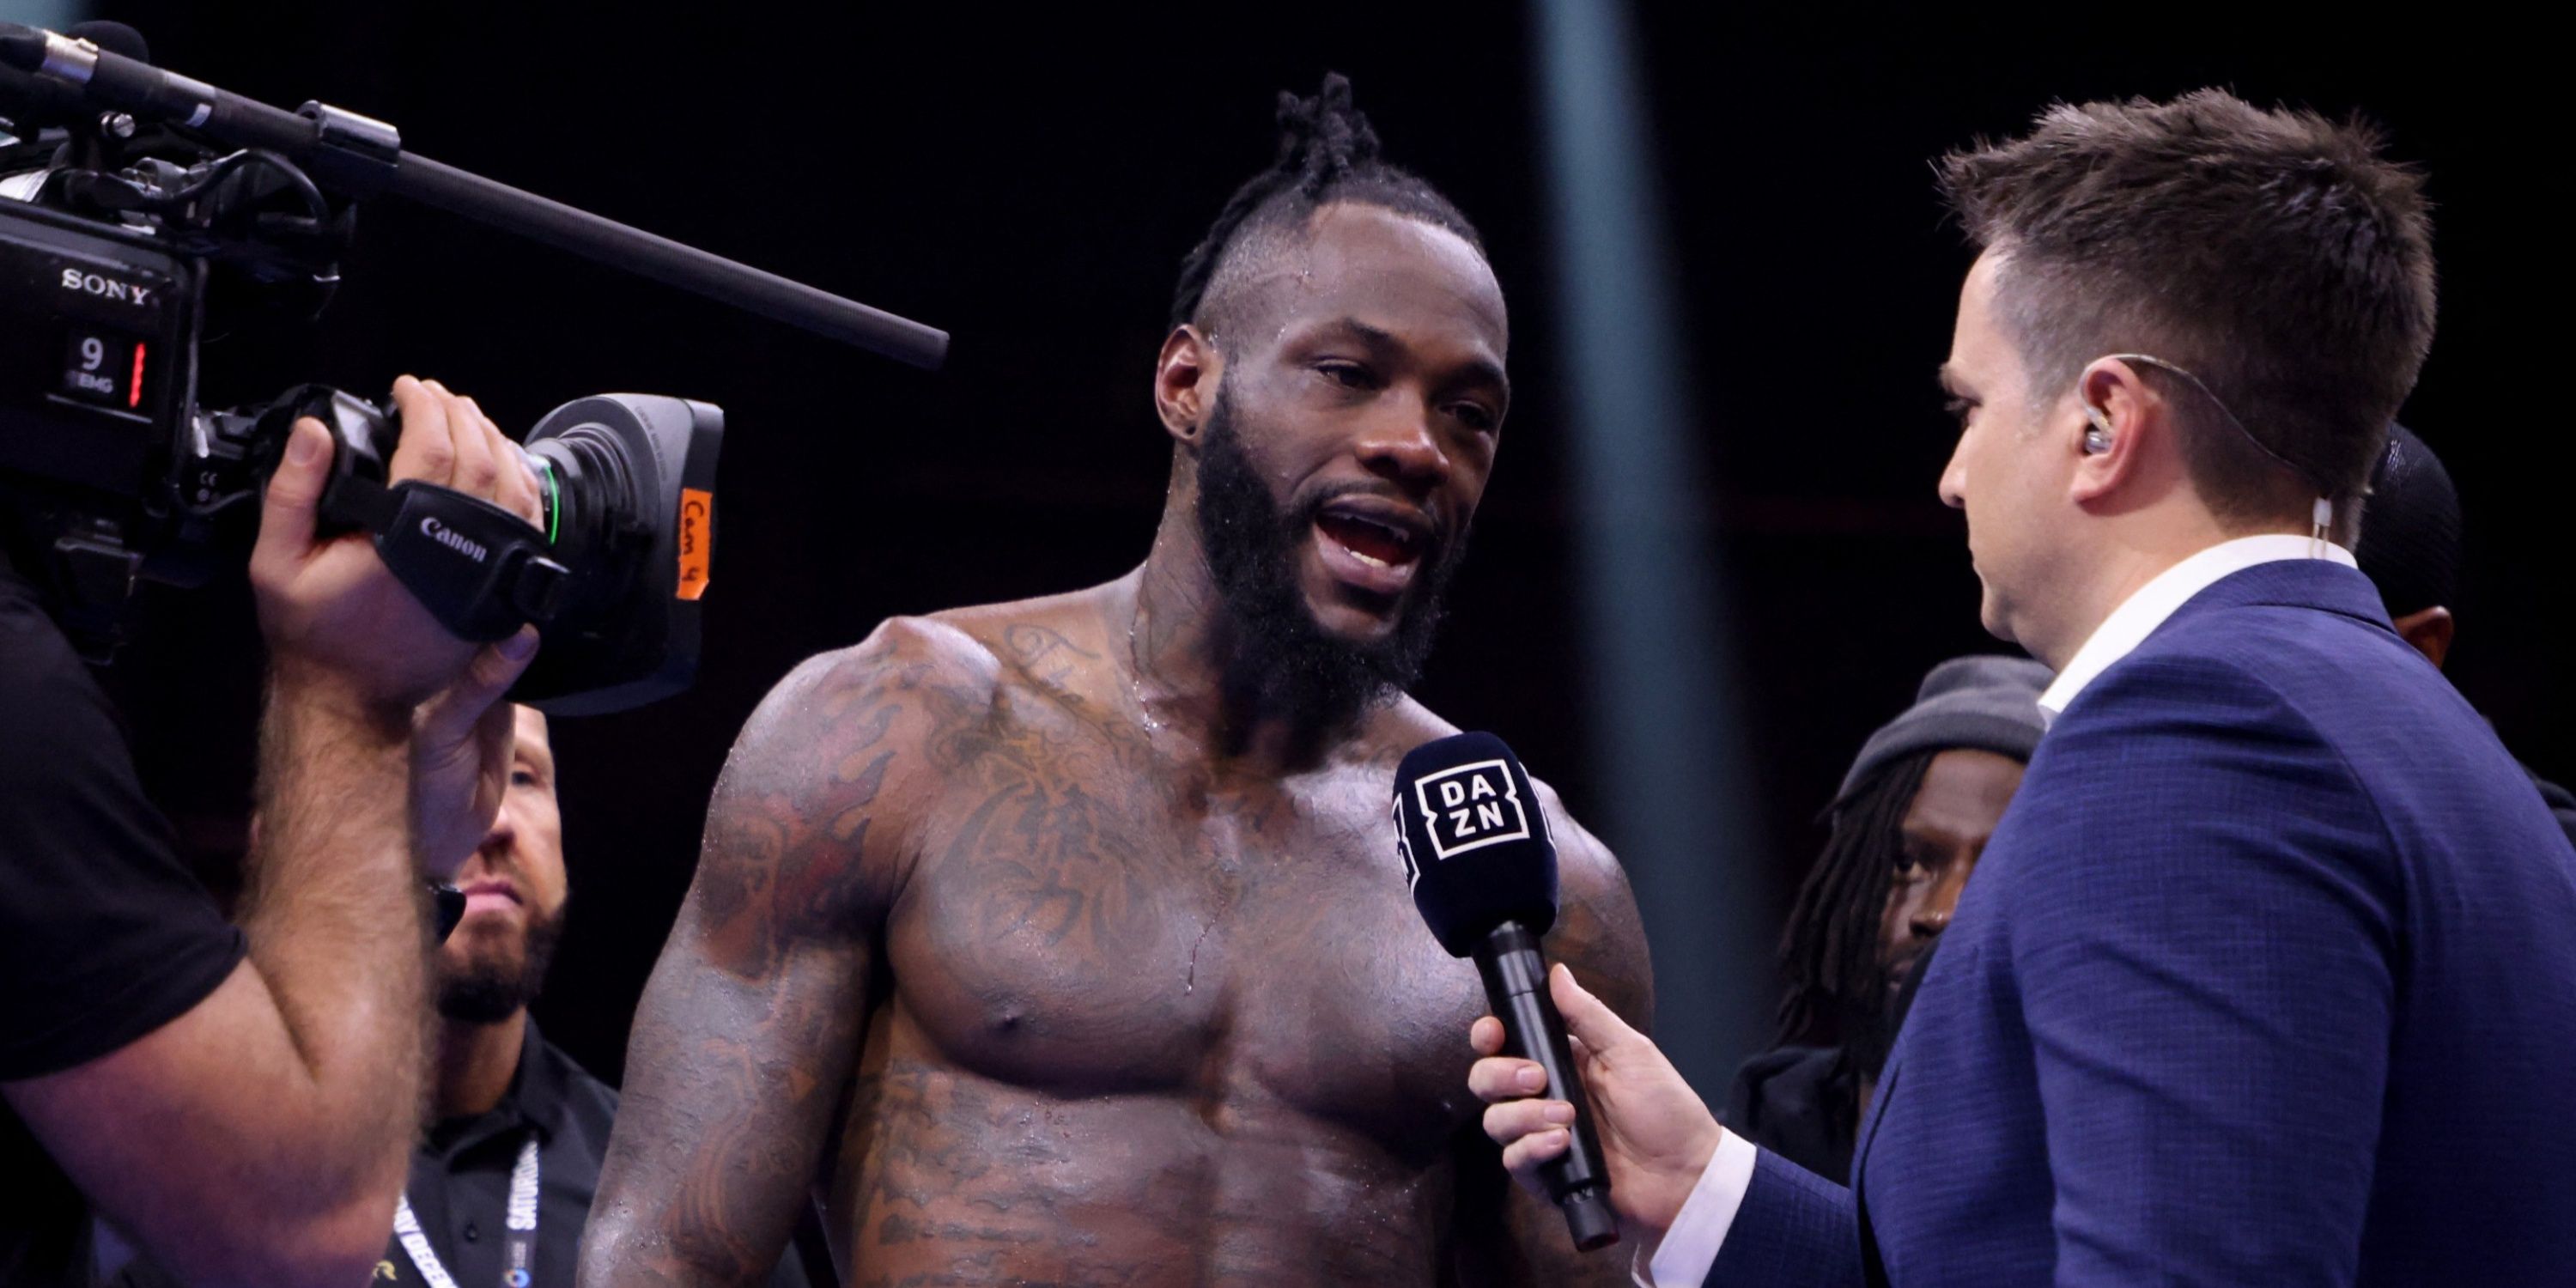 Deontay Wilder speaking at a post-fight interview.